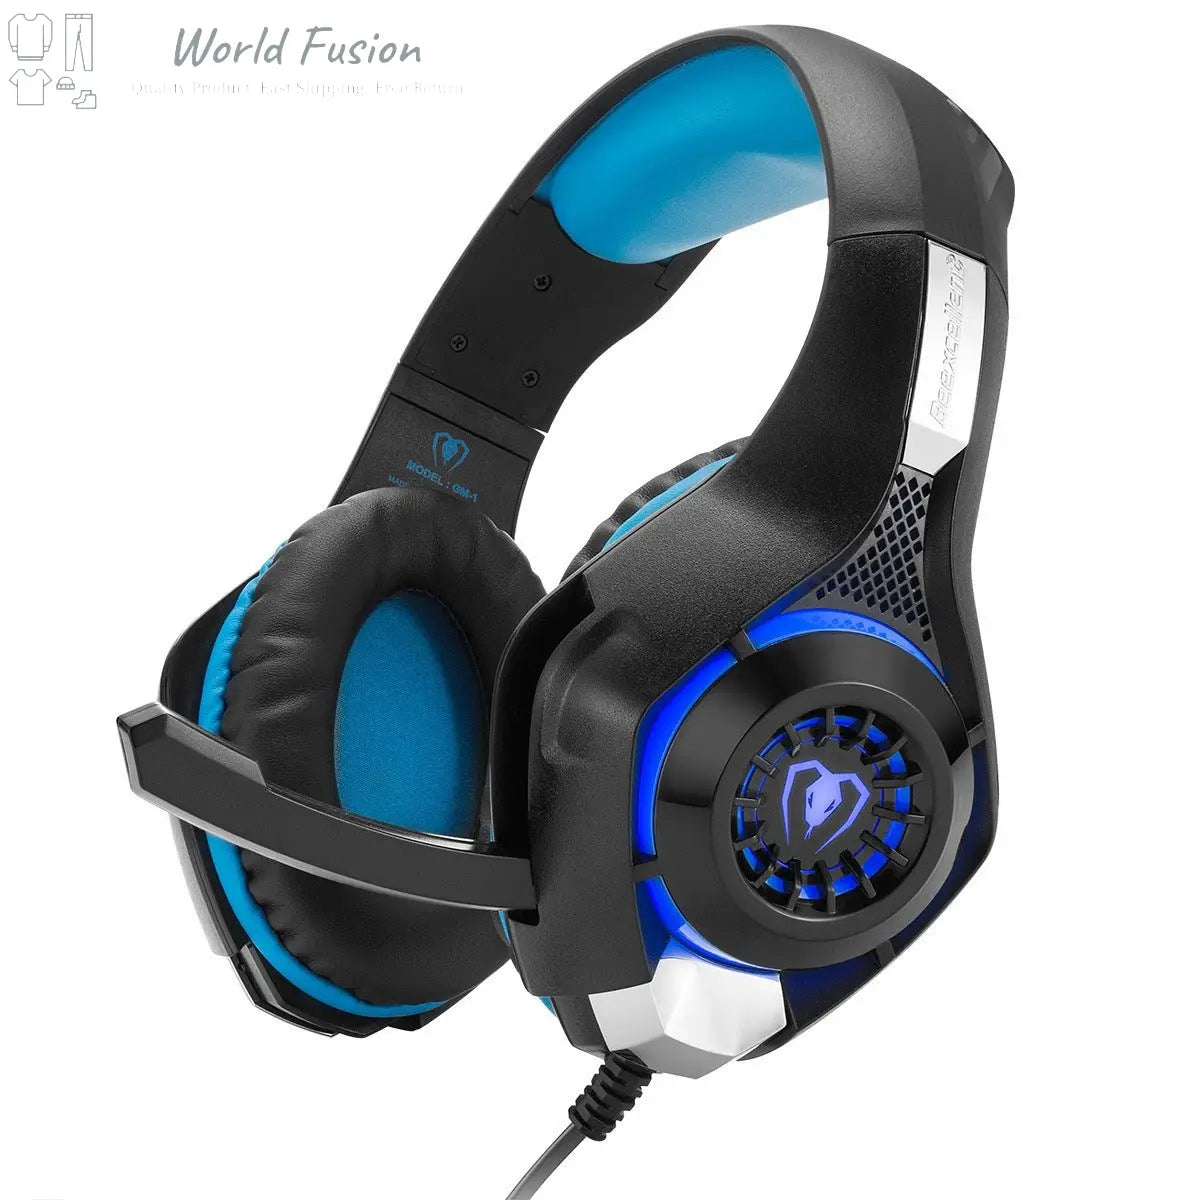 Headphones for gaming gaming - World Fusion